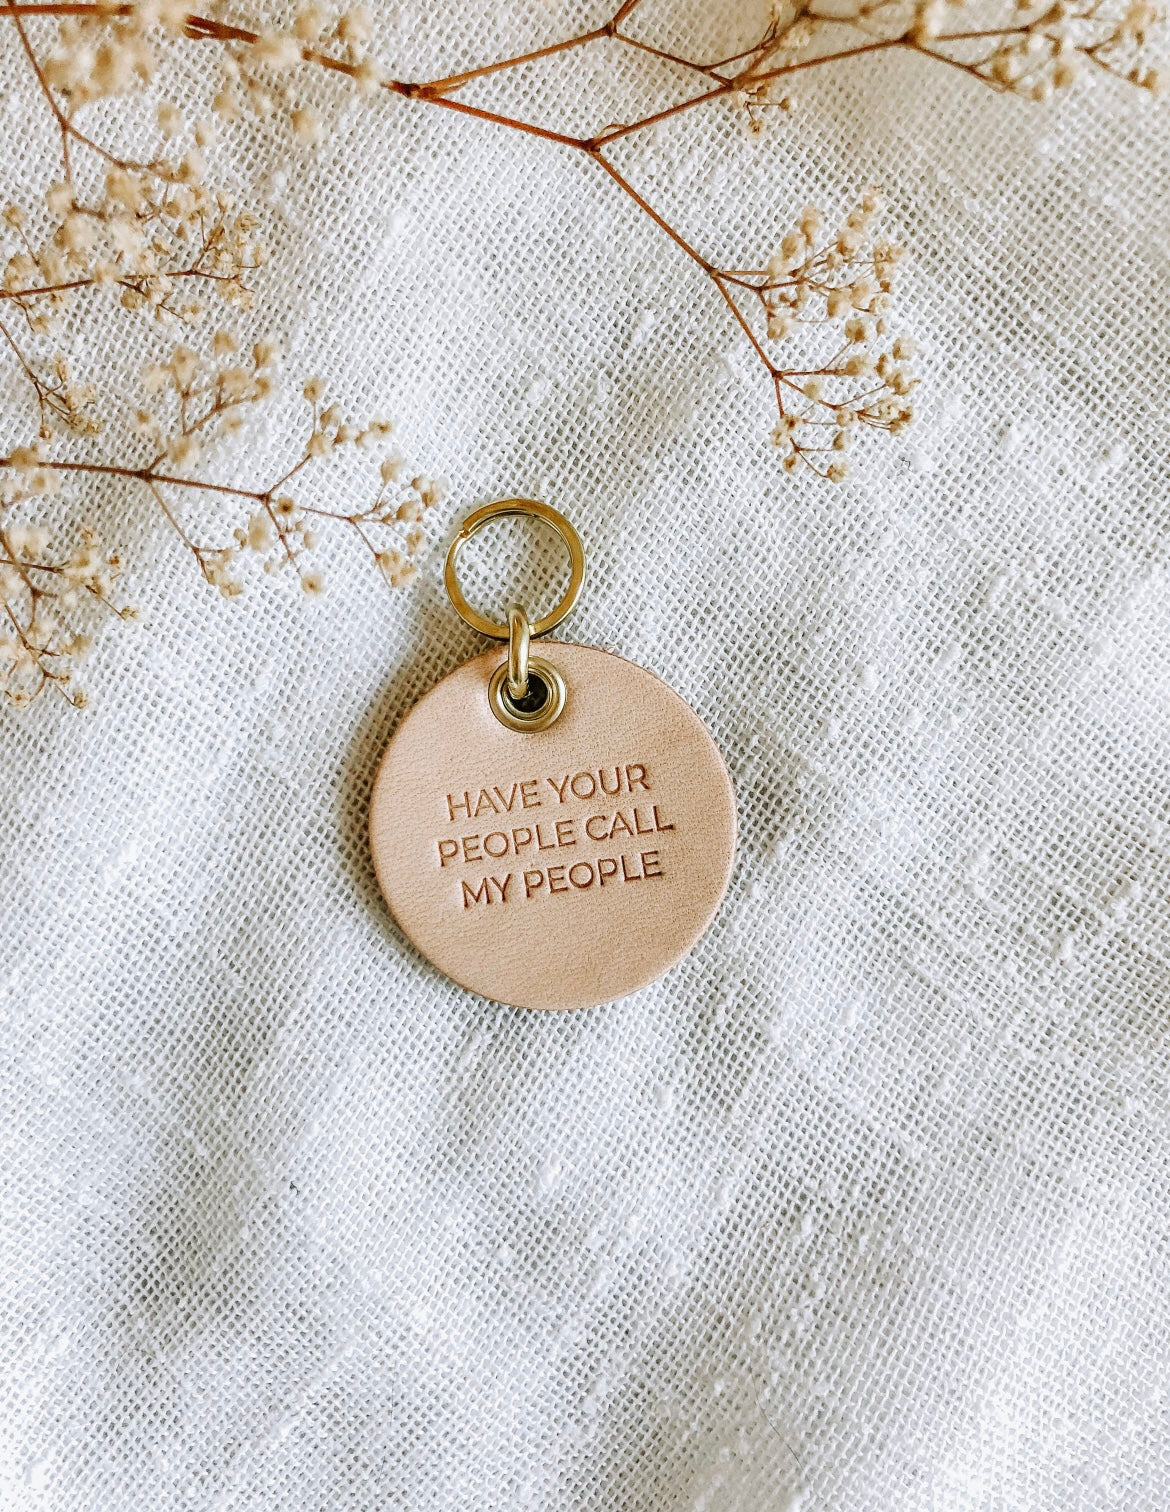 "Have Your People Call My People" Leather Pet Collar Tag